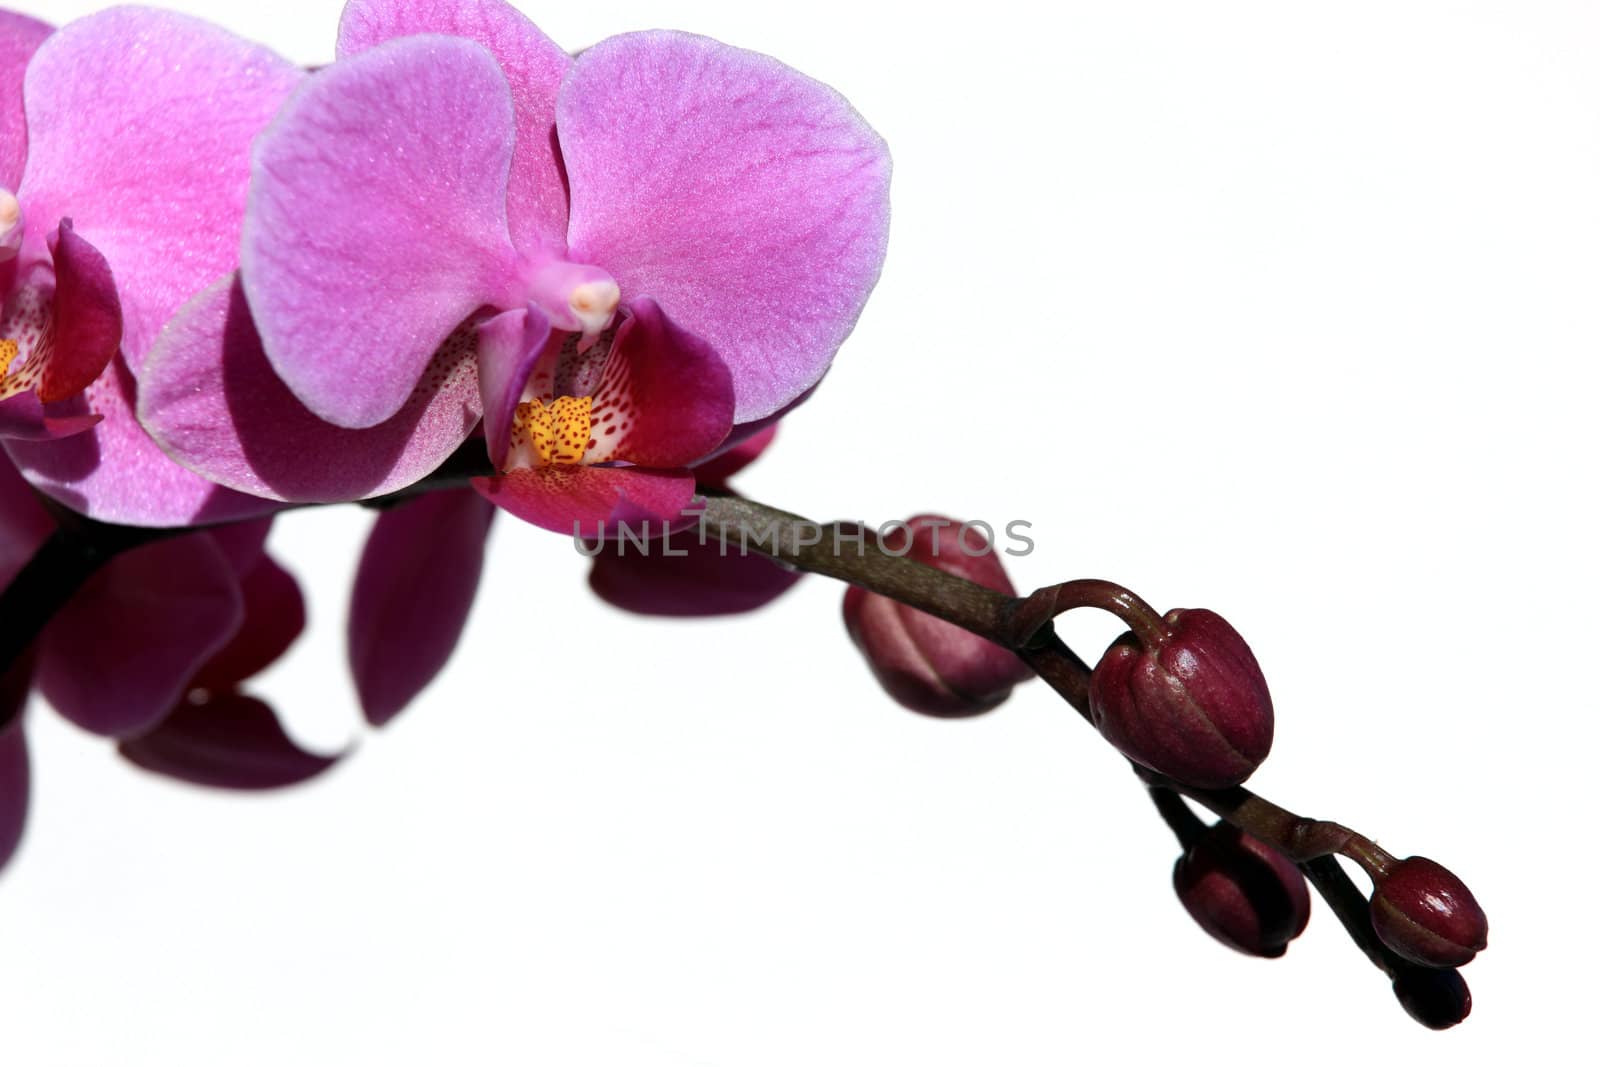 Violet phalaenopsis orchid by monner